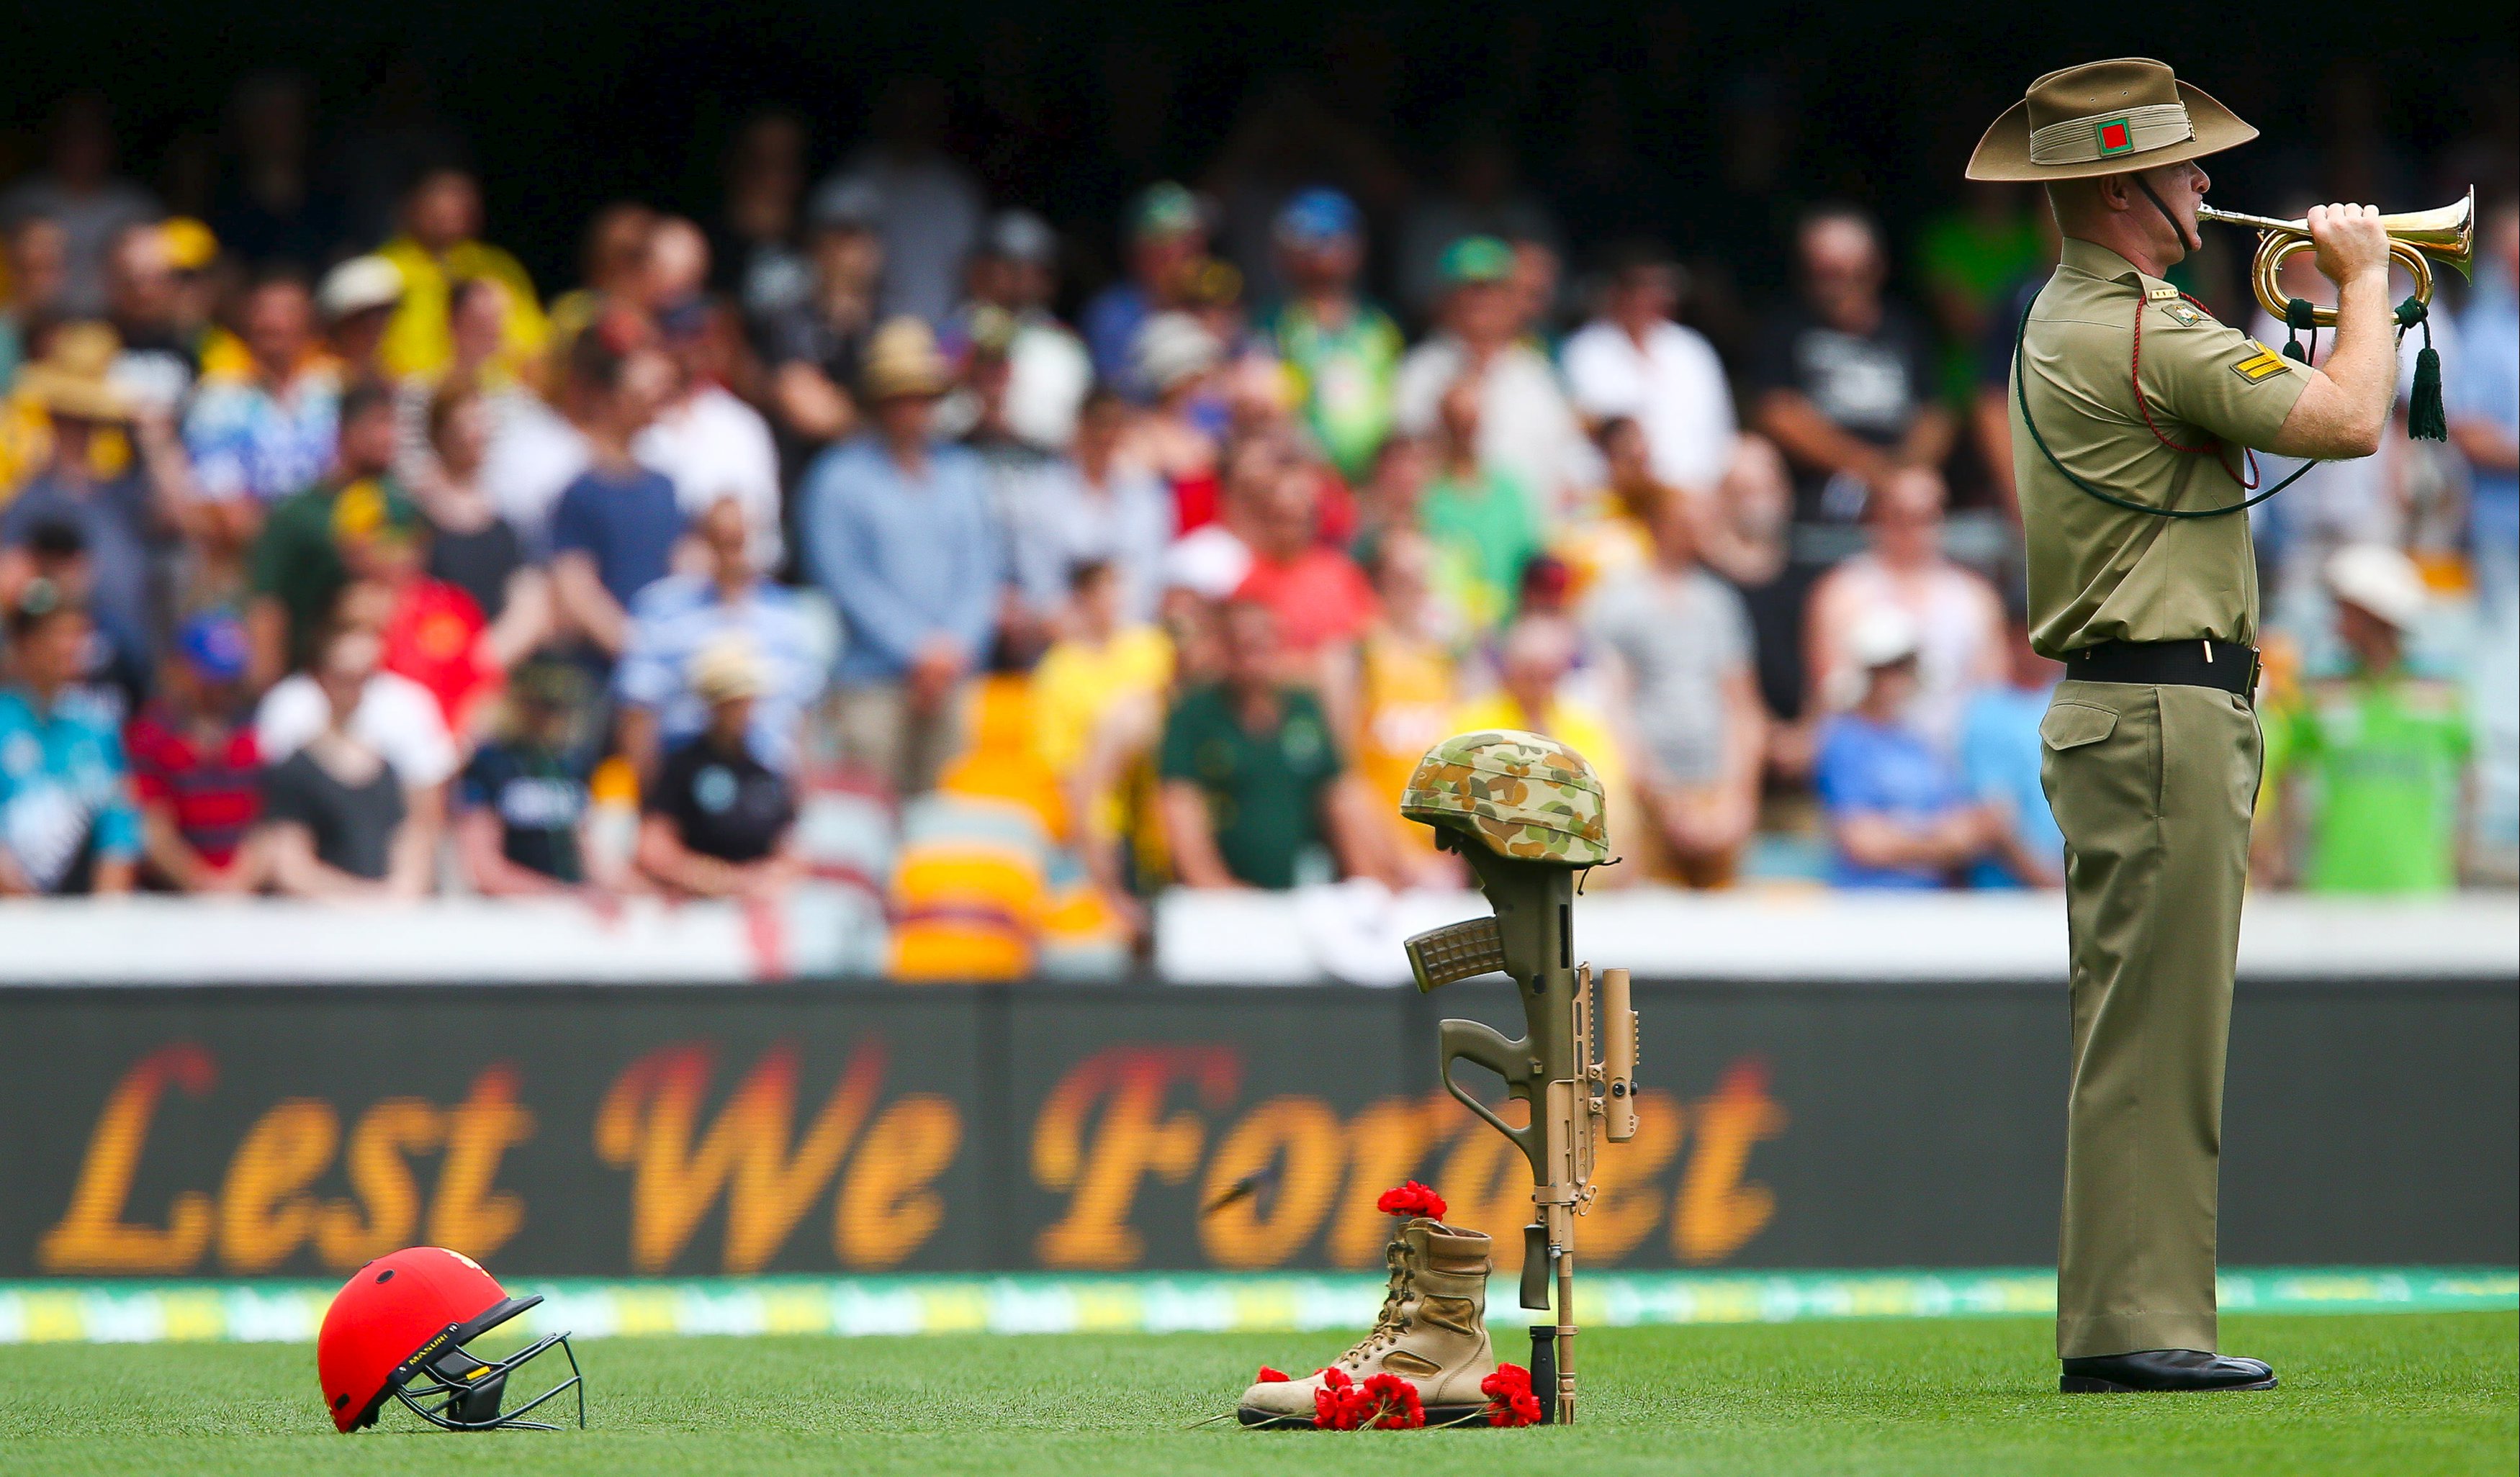 An Australian Army bugler plays the last post to commemorate the 100th anniversary of ANZAC and the death of Australian Test cricketer Phillip Hughes 12 months ago, before the first cricket test match between Australia and New Zealand in Brisbane November 5, 2015.  REUTERS/Patrick Hamilton    TPX IMAGES OF THE DAY